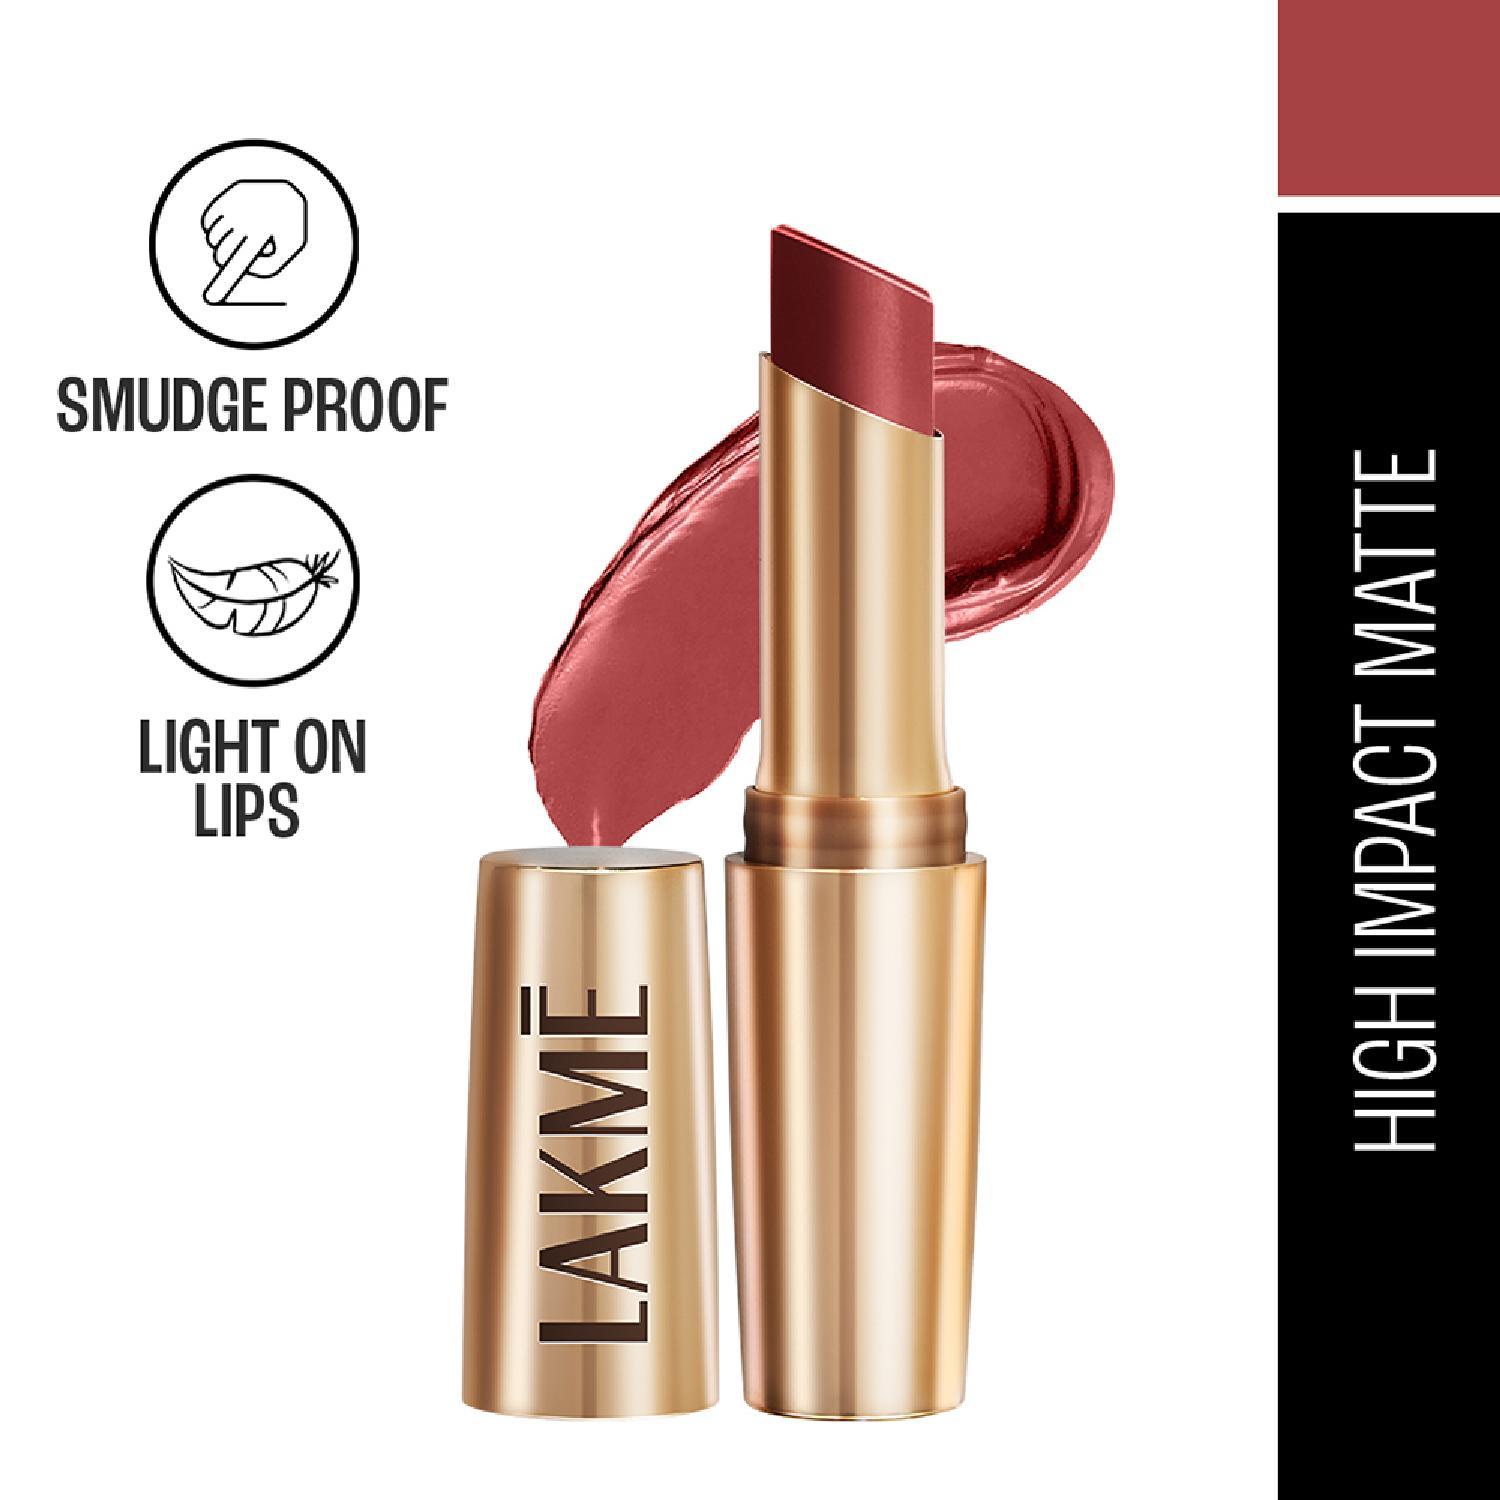 Lakme | Lakme 9 to 5 Powerplay Priming Matte Lipstick, Lasts 16hrs, Roseatte Red (3.6g)